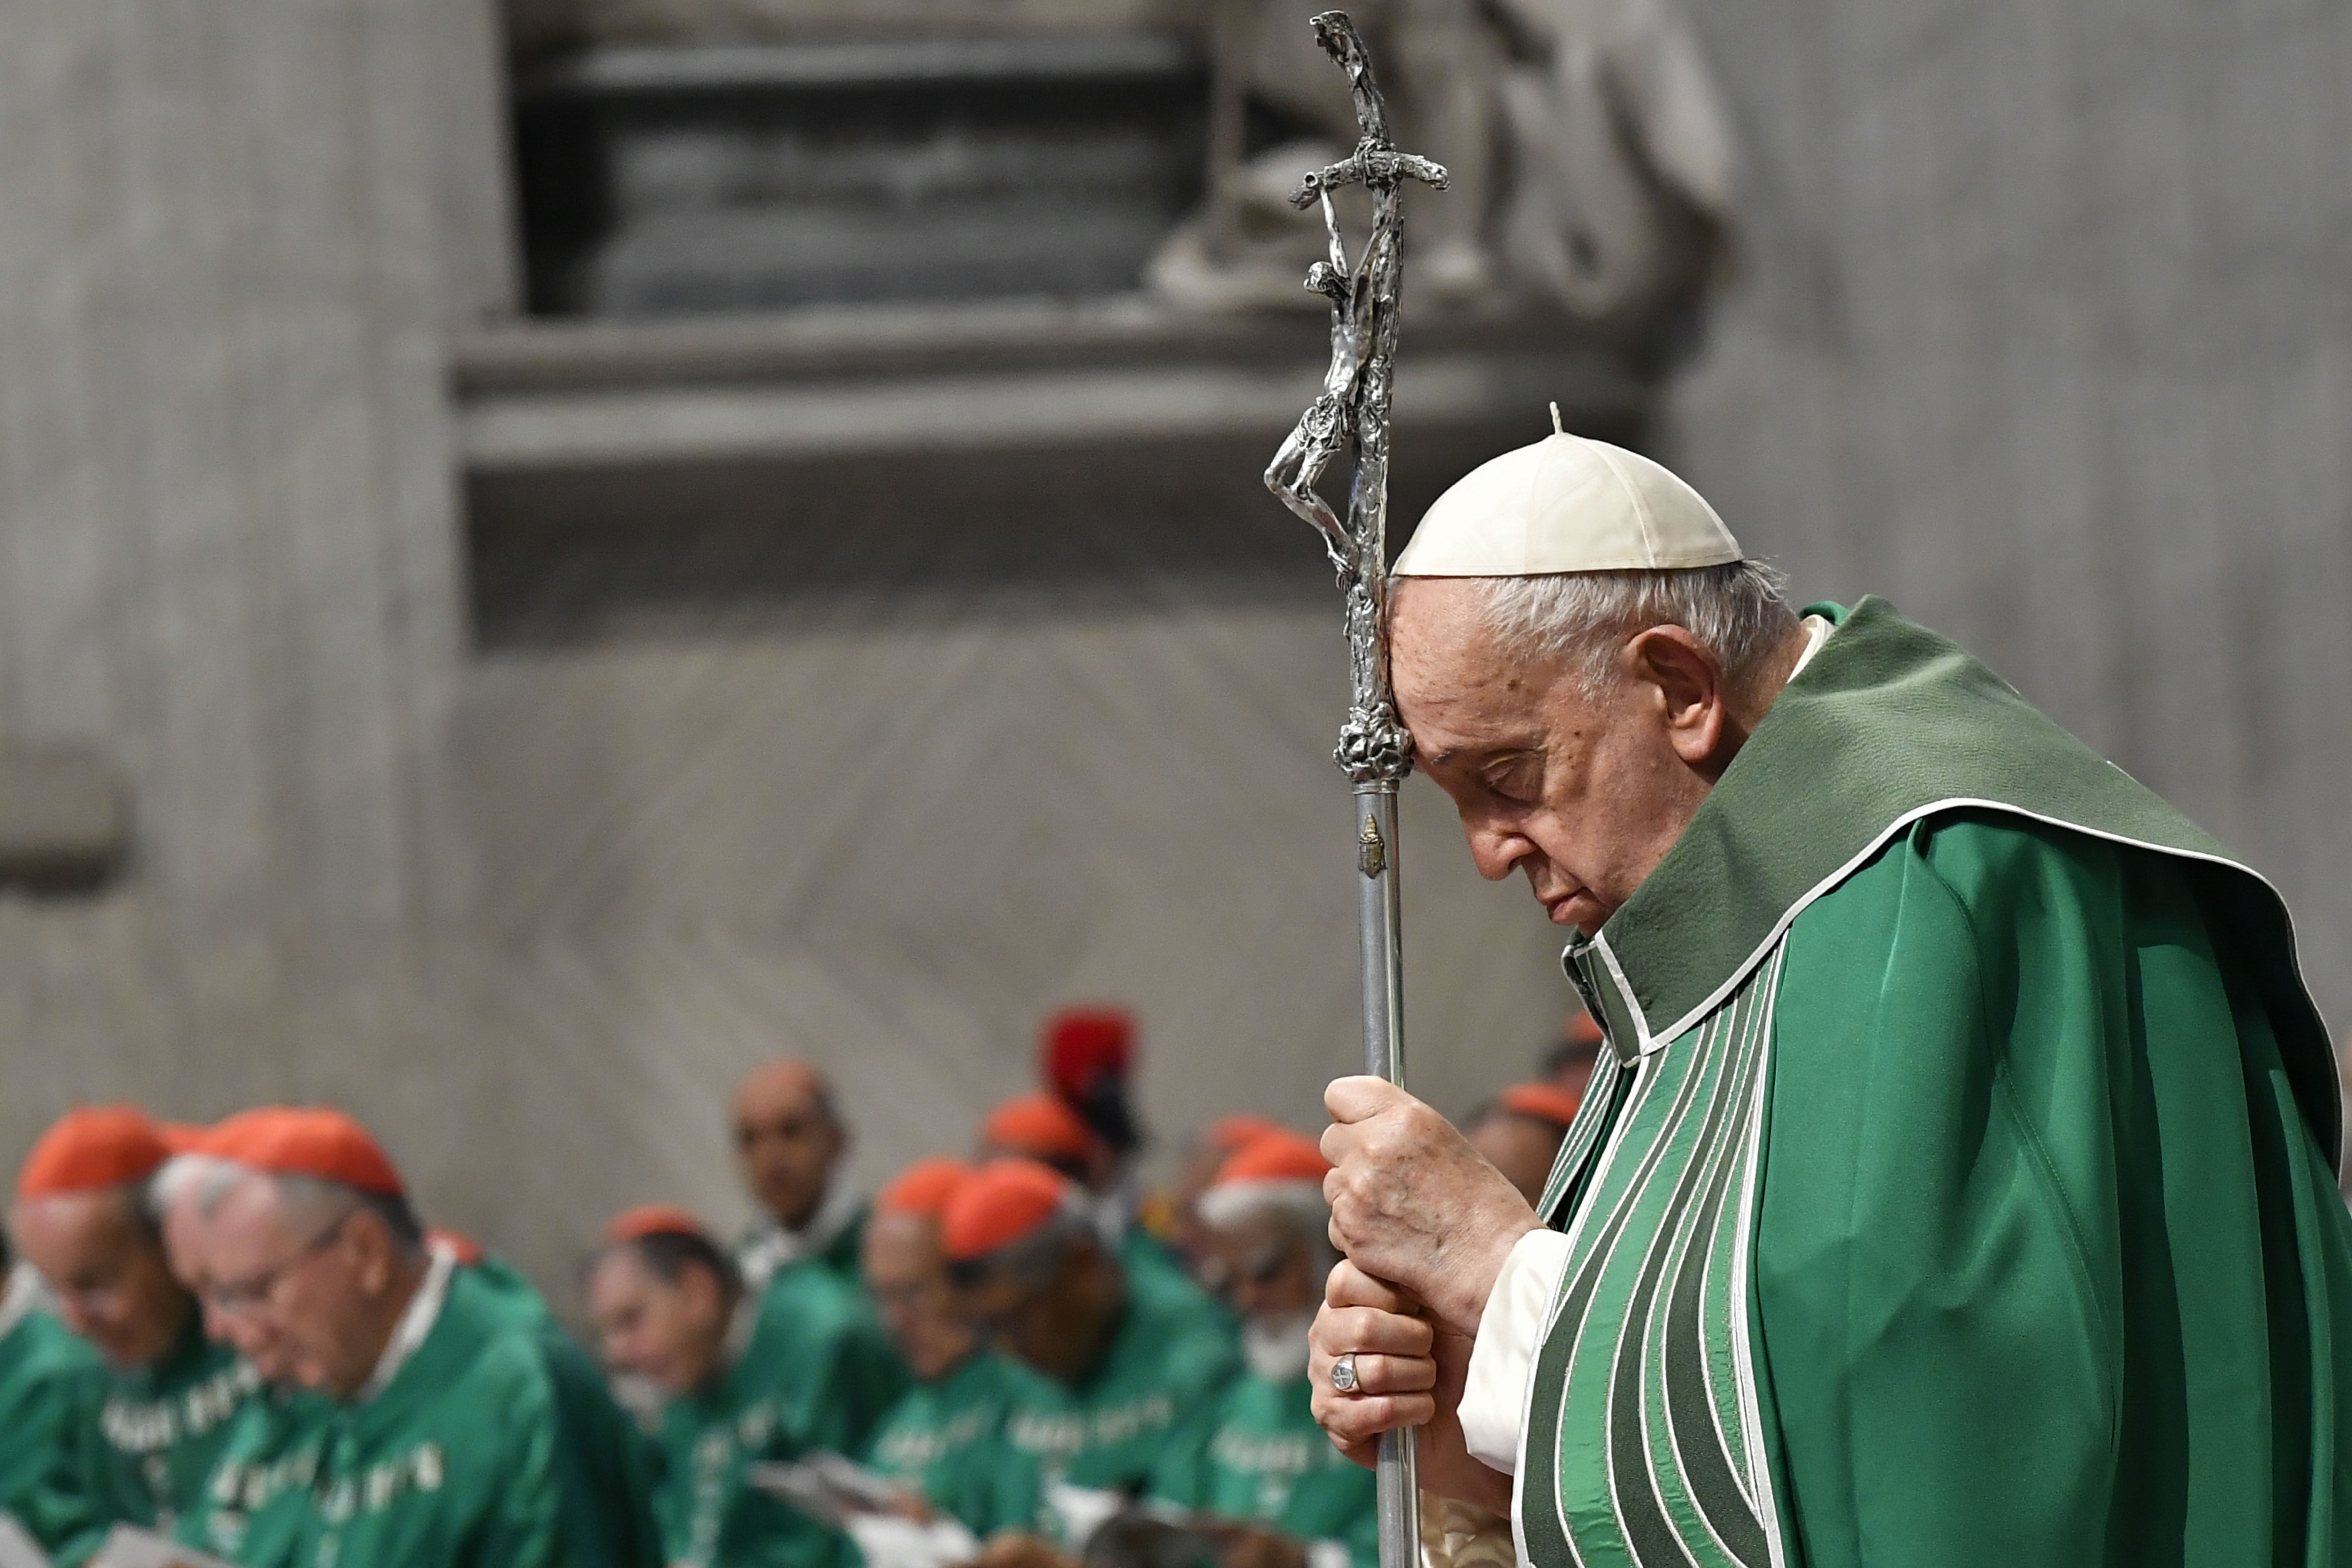 Pope Francis prays while holding a crosier during Mass in St. Peter's Basilica at the Vatican Oct. 29, 2023, marking the conclusion of the first session of the Synod of Bishops on synodality. (CNS photo/Vatican Media)